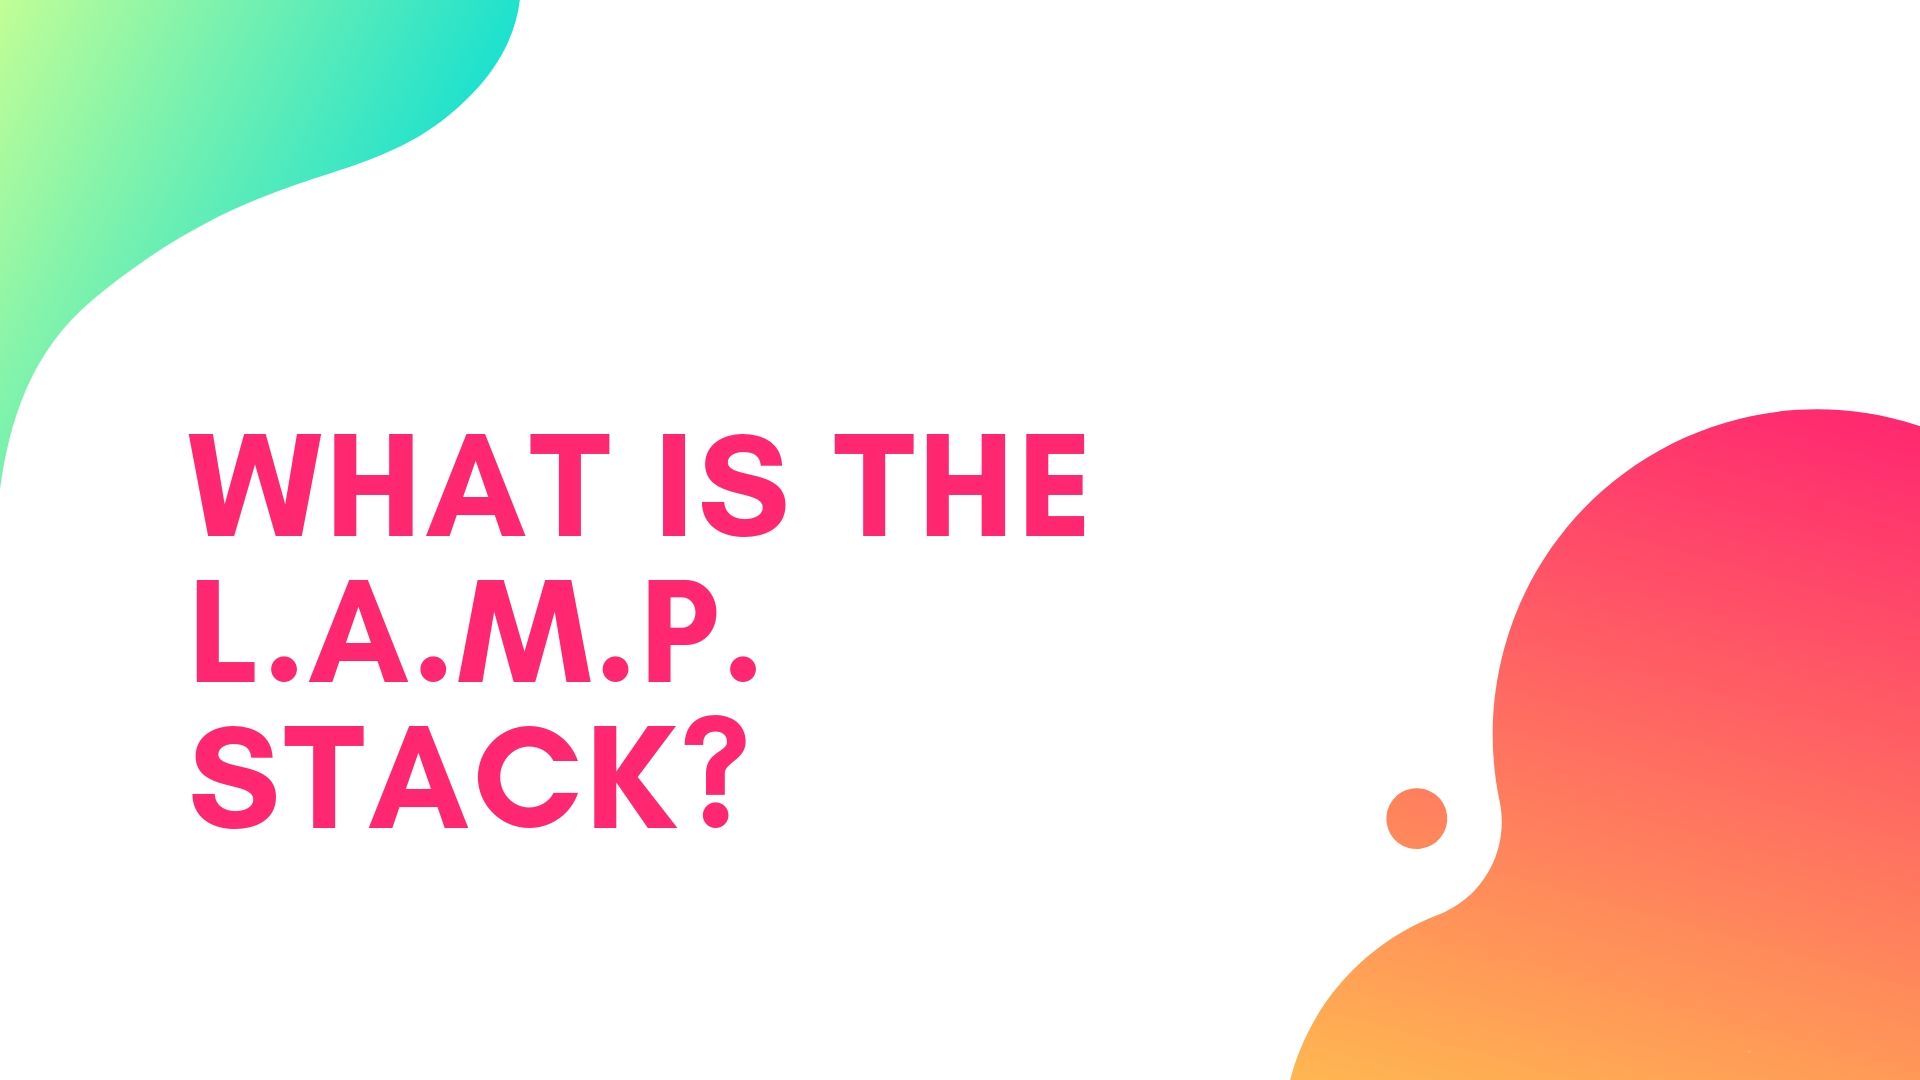 What’s a L.A.M.P. Application? Or What’s the LAMP Stack?